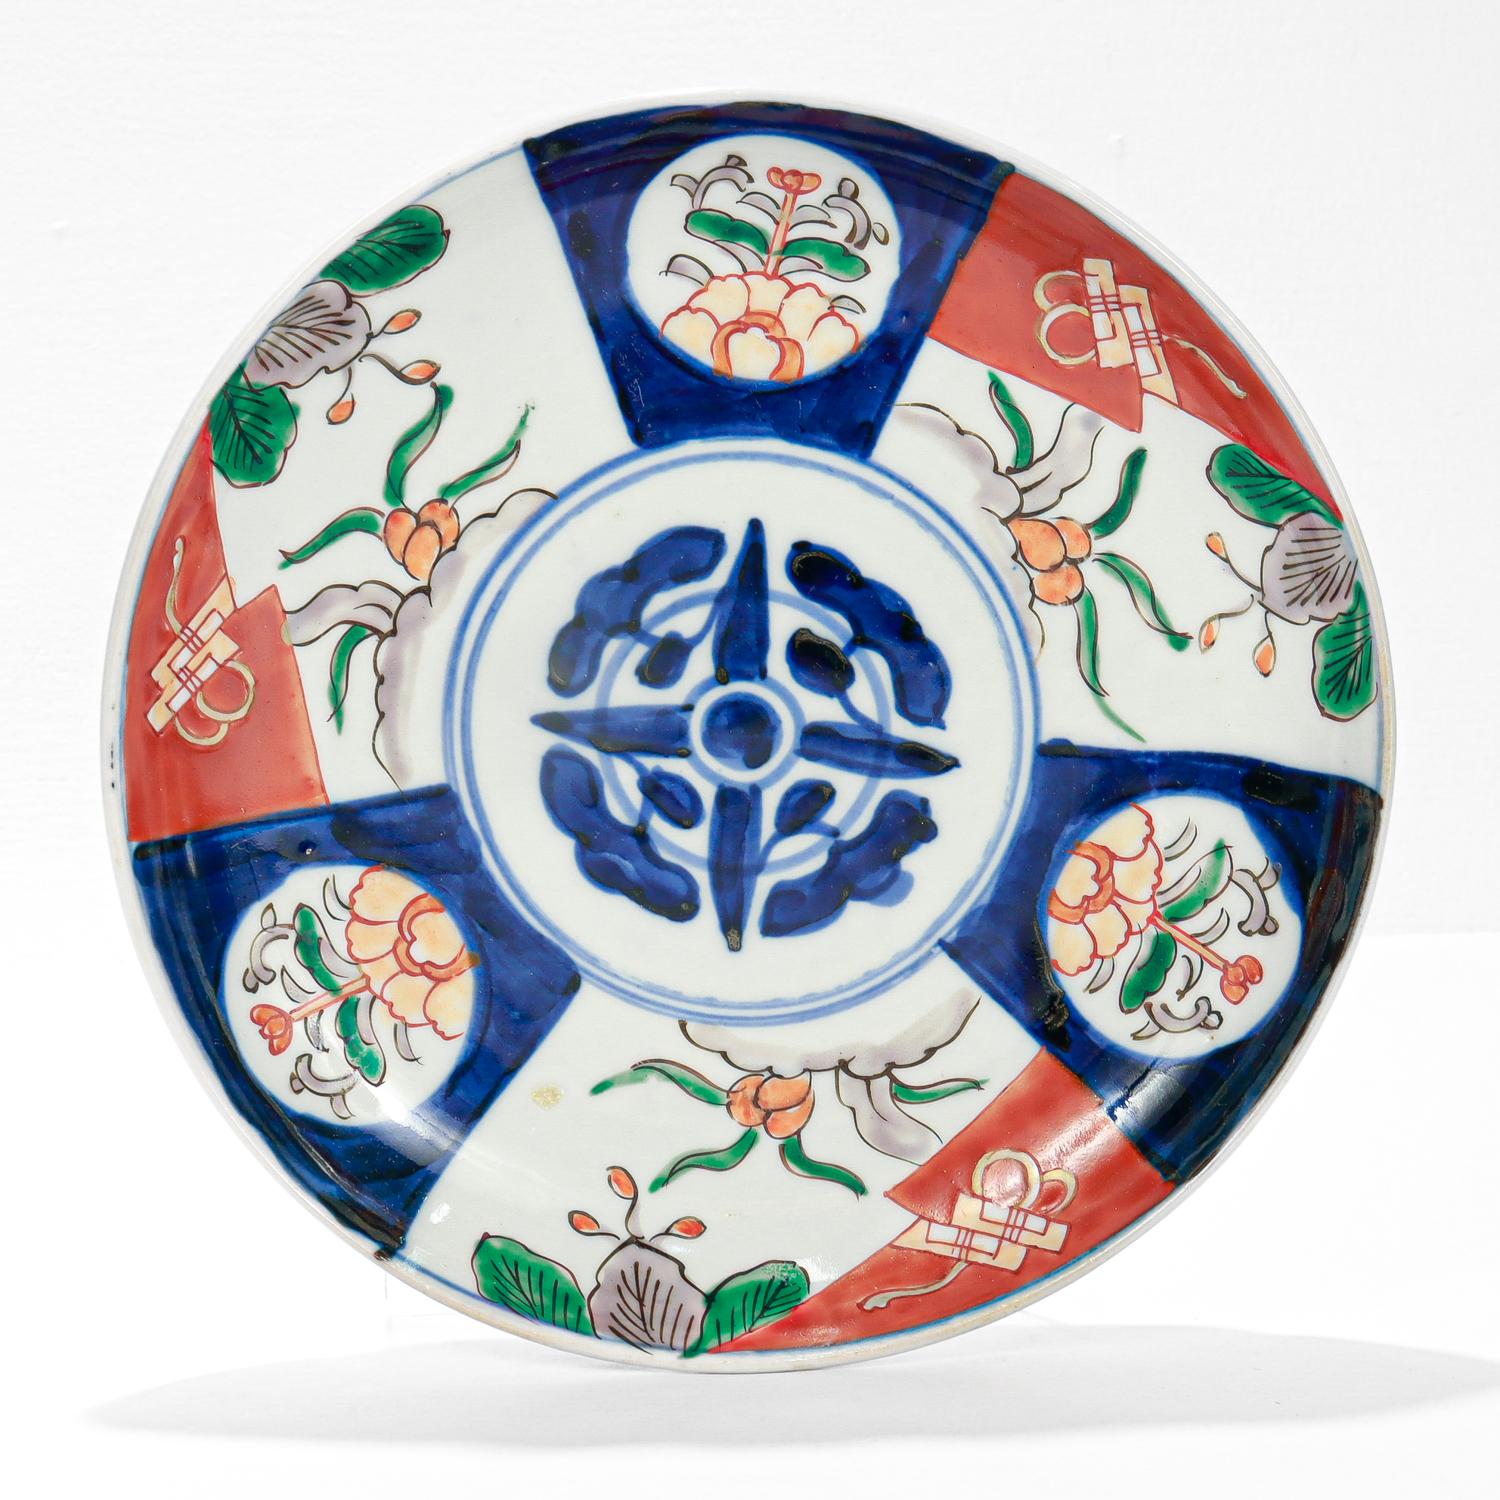 A fine antique Japanese Imari plate.

With a white ground and decorated with geometric and floral devices in blues, reds, oranges, and oranges. The blue cross device to the middle is reminiscent of a shimazu mon.

The exterior of the rim has blue